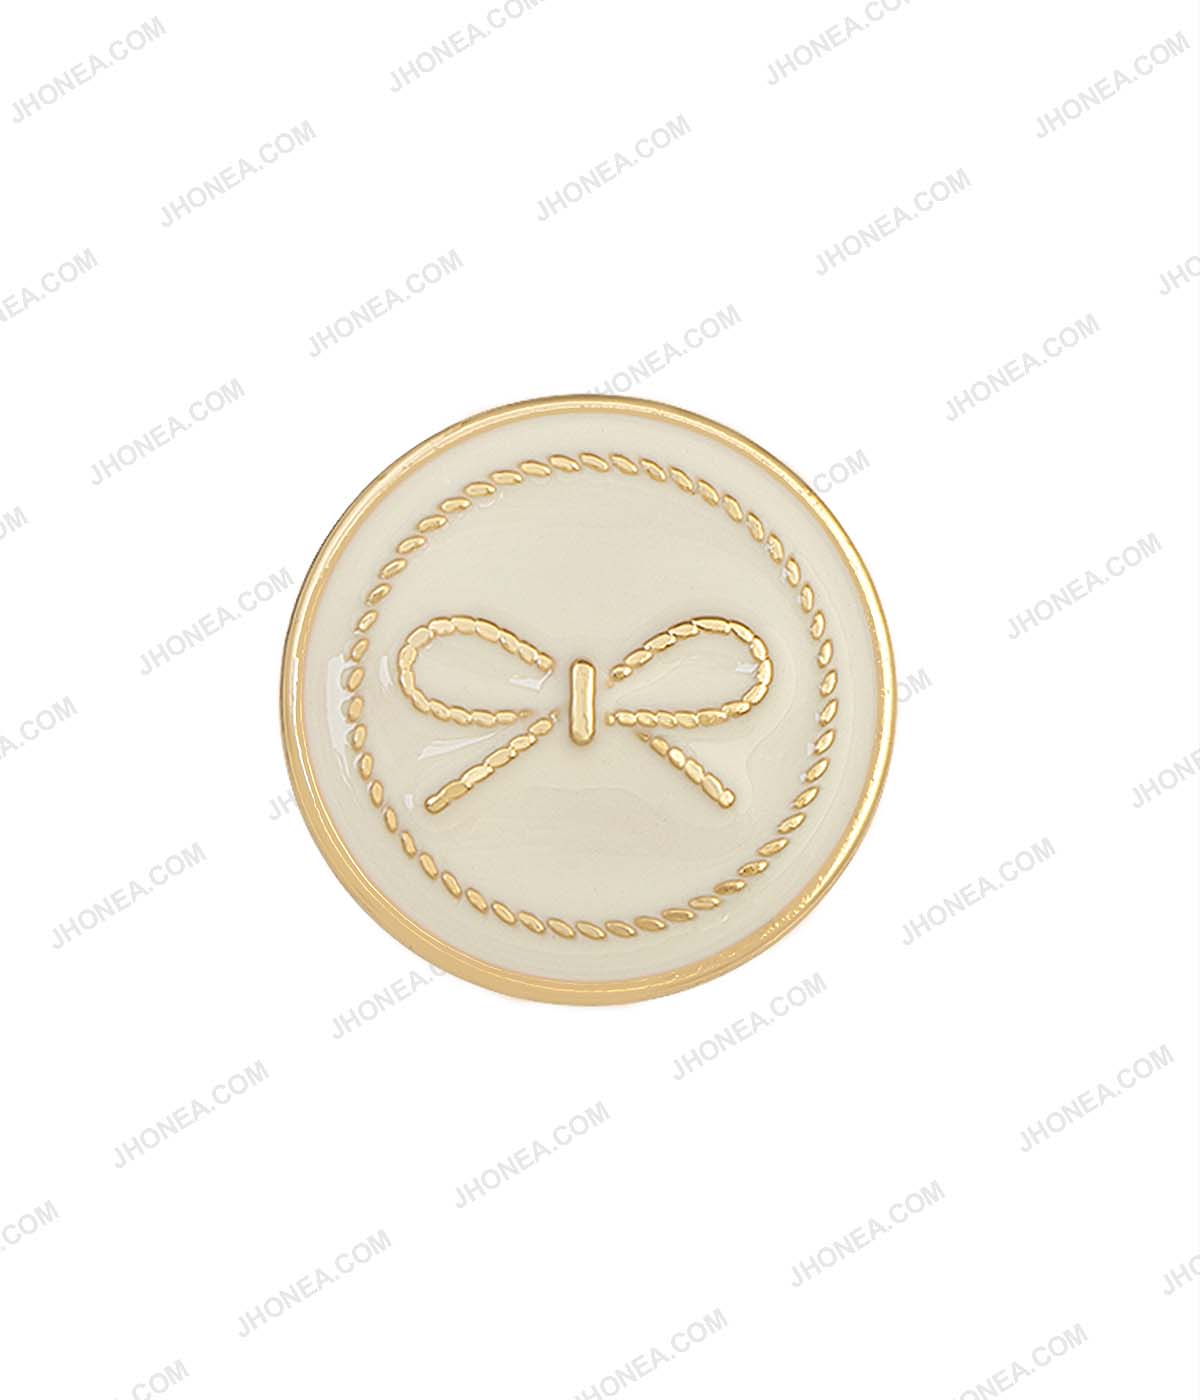 Premium White with Gold Color Bow Design Western Clothing Metal Buttons